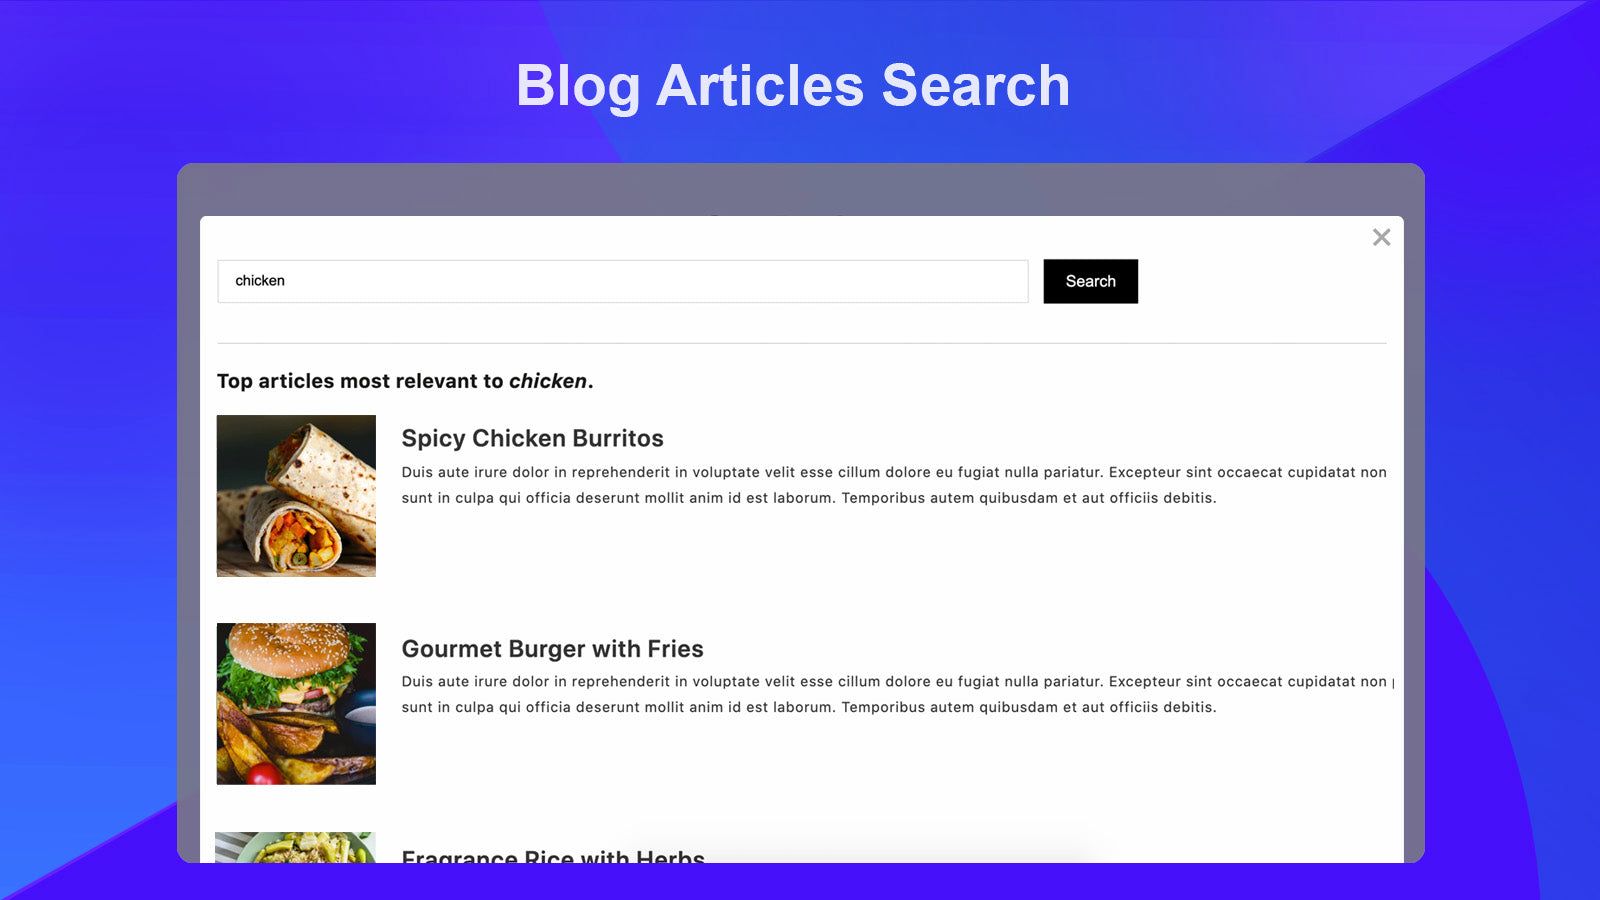 Shopify Articles Tag Filters, Blog Search & Featured Articles